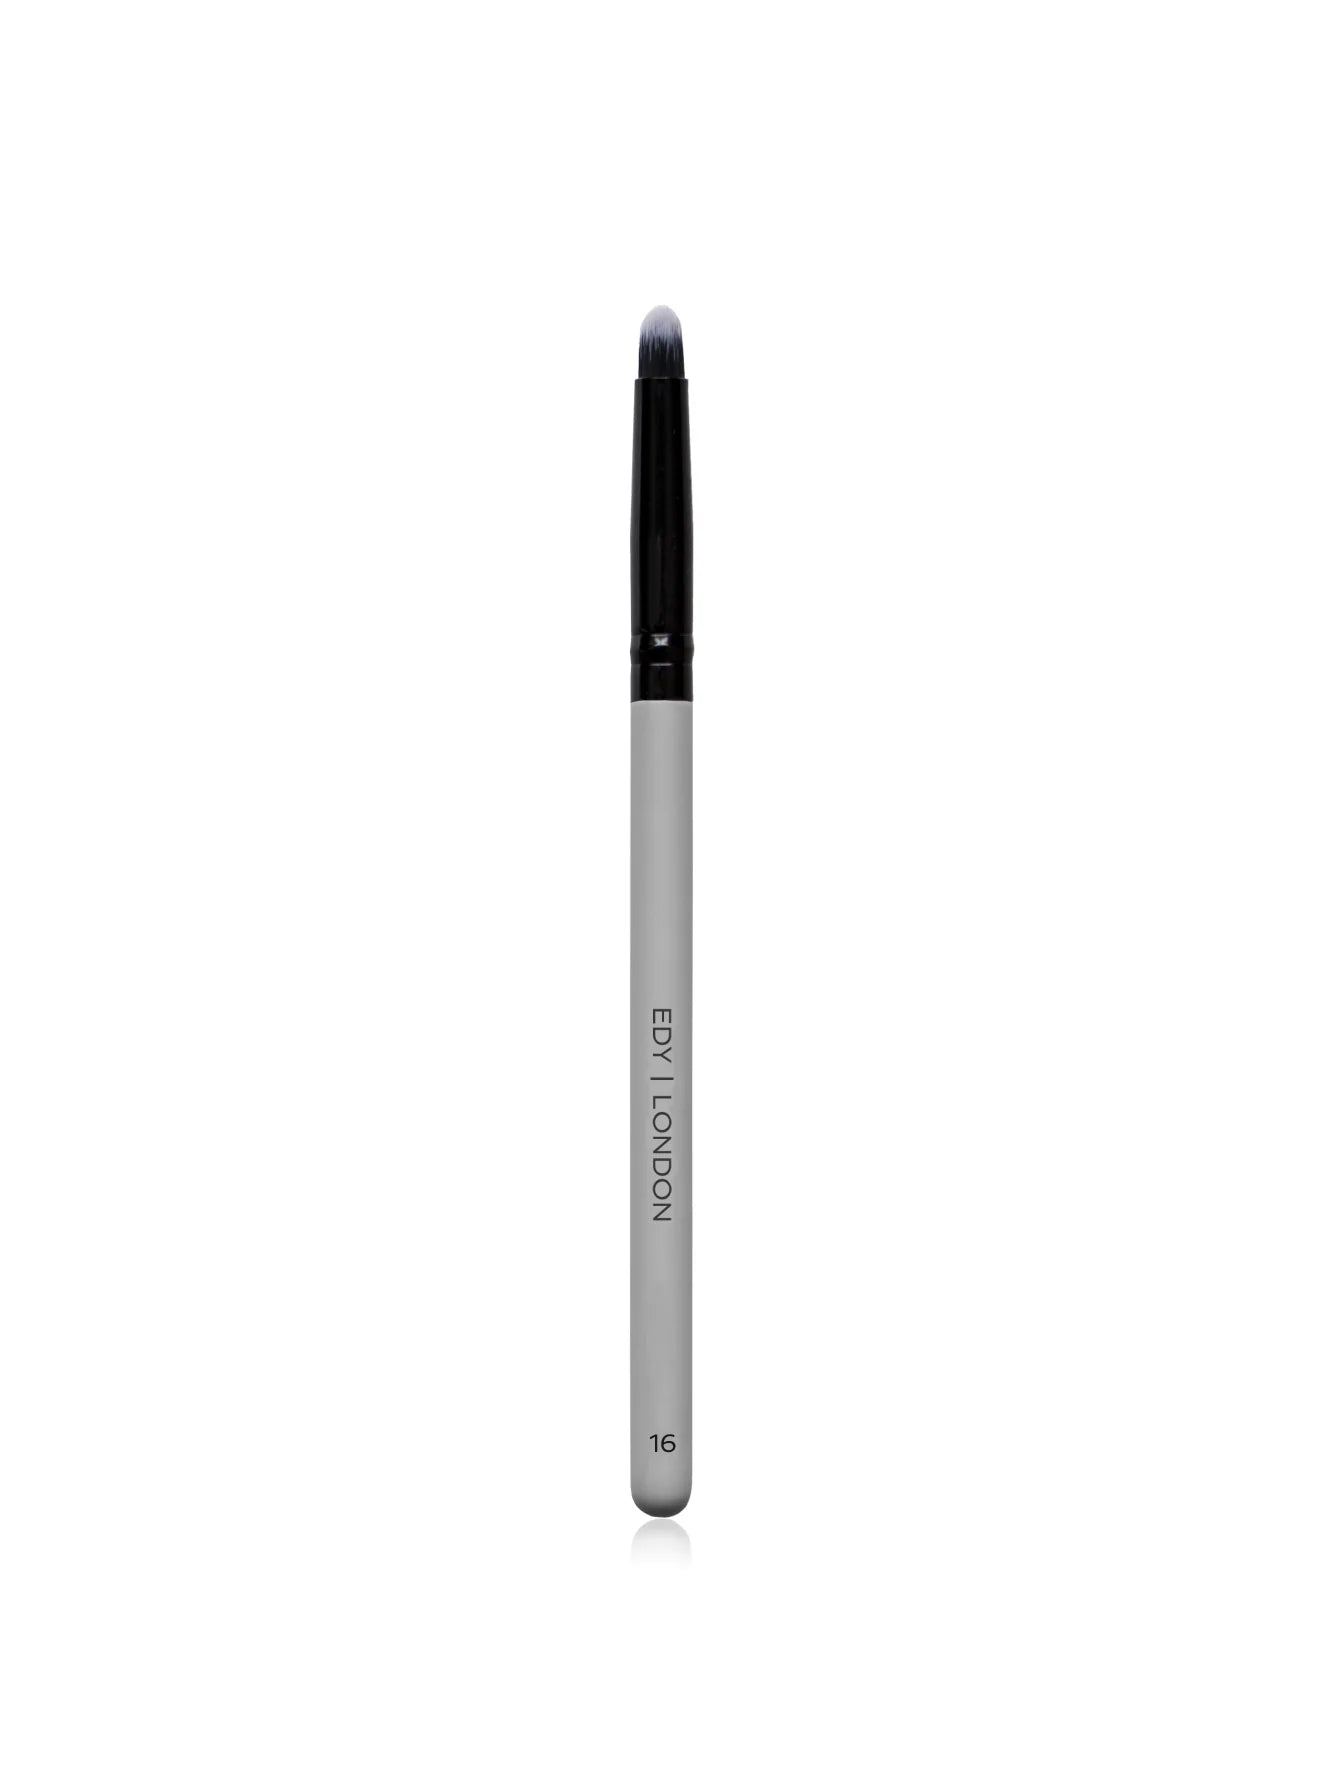 Small Pencil Brush 16 Make-up Brush EDY LONDON Cool Grey   - EDY LONDON PRODUCTS UK - The Best Makeup Brushes - shop.edy.london